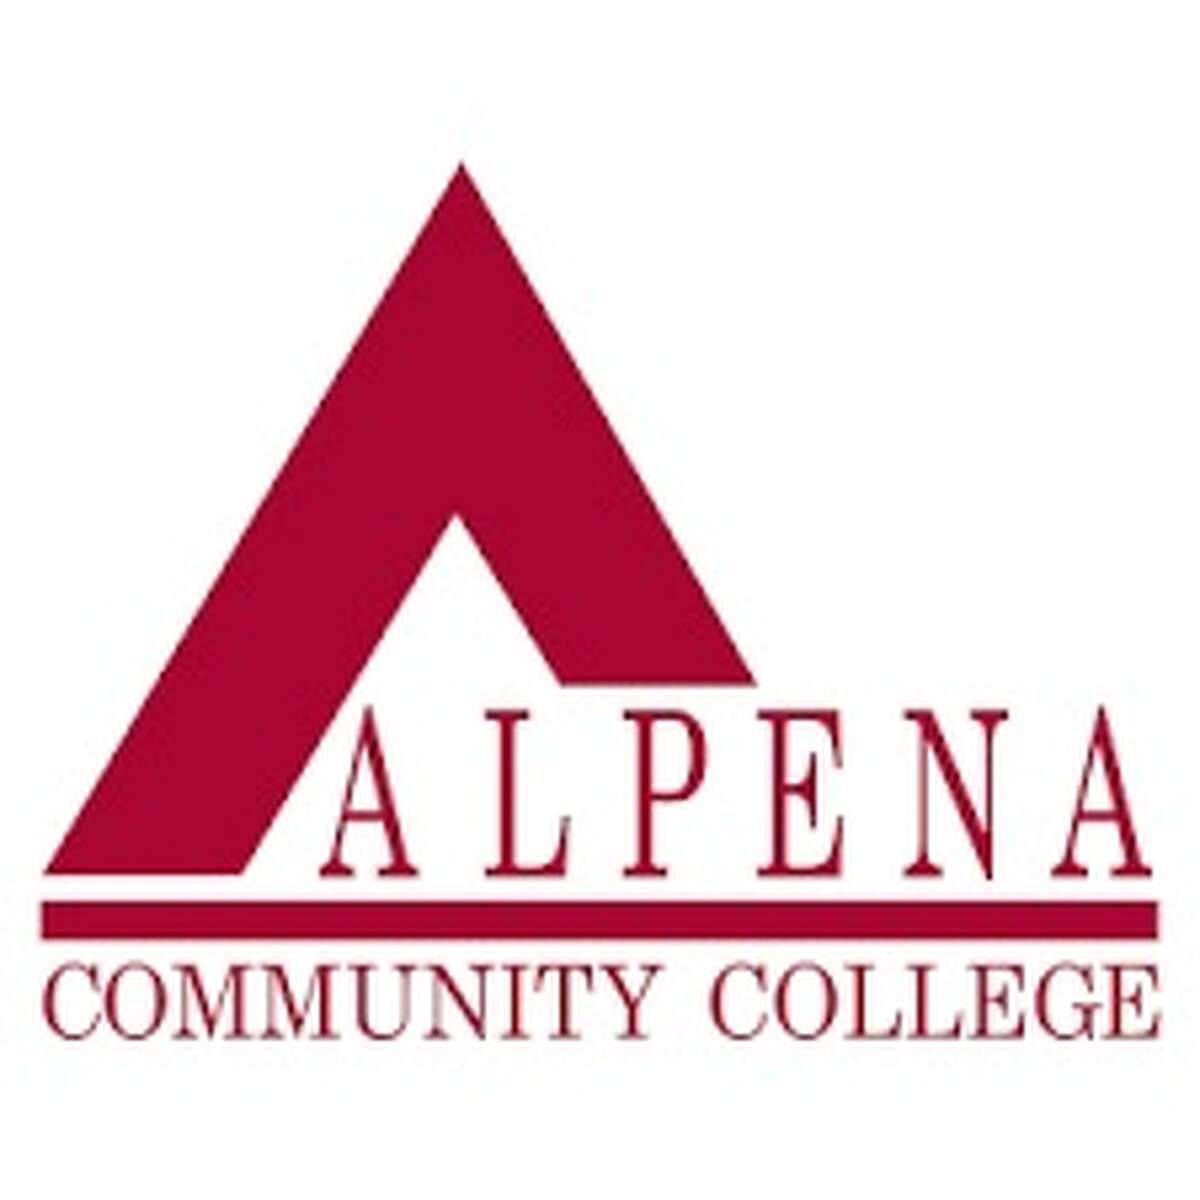 Chase Callaway, of Onekama, and Clark May, of Bear Lake, were named to the dean's list of Alpena Community College for the fall semester.